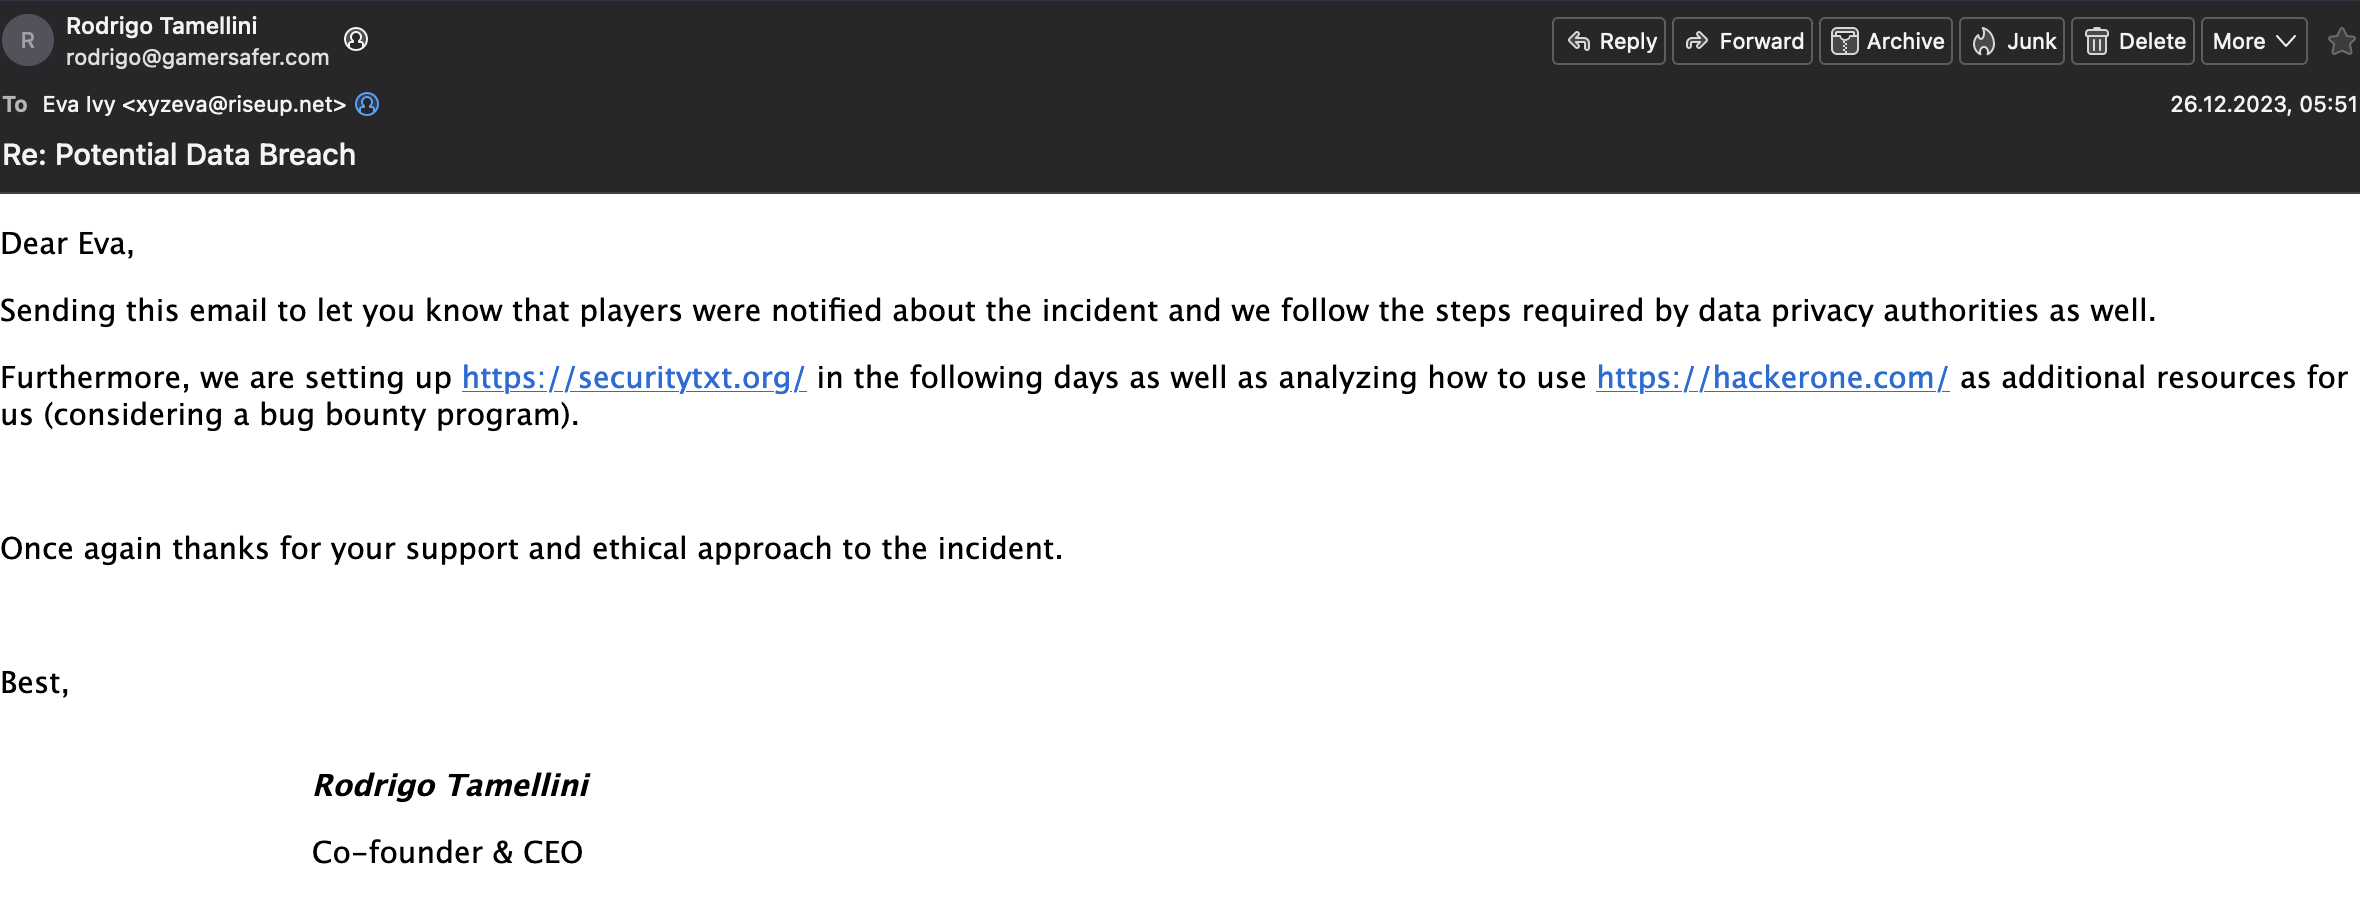 Dear Eva, Sending this email to let you know that players were notified about the incident and we follow the steps required by data privacy authorities as well. Furthermore, we are setting up https://securitytxt.org/ in the following days as well as analyzing how to use https://hackerone.com/ as additional resources for us (considering a bug bounty program). Once again thanks for your support and ethical approach to the incident. Best, Rodrigo